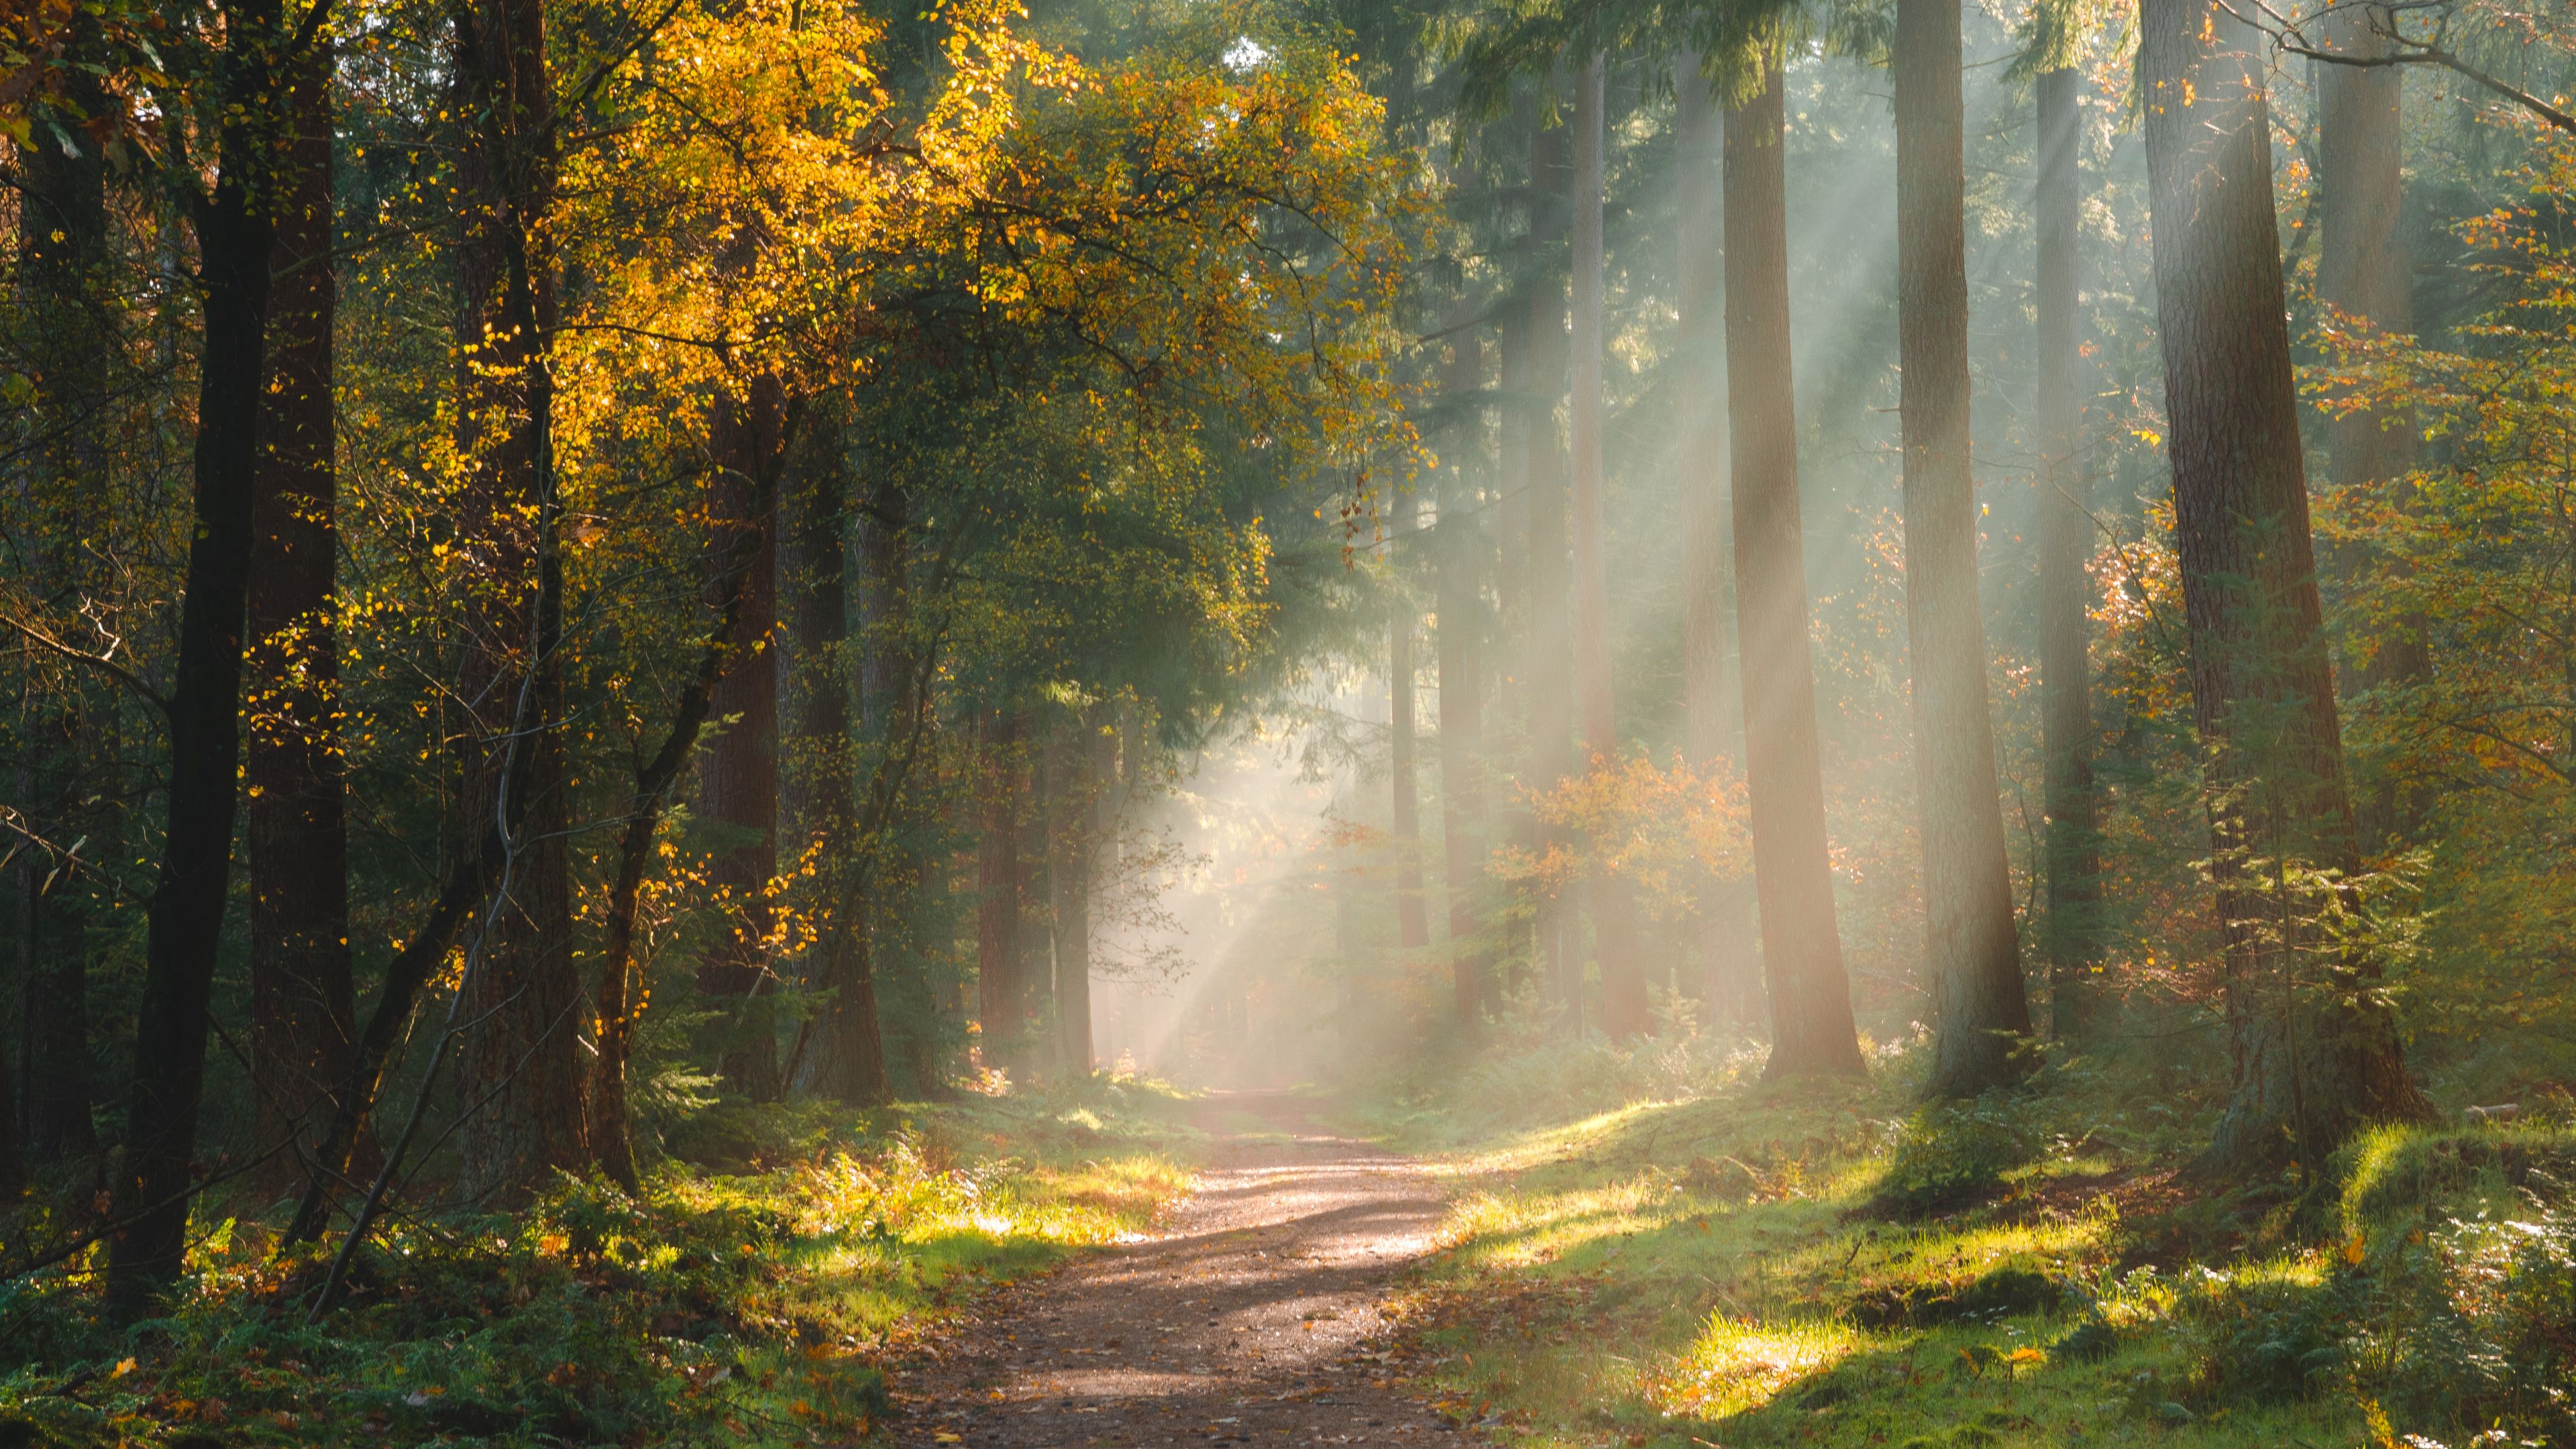 Download Wallpaper 3840x2160 Forest Path Sunlight Trees 4k Uhd 169